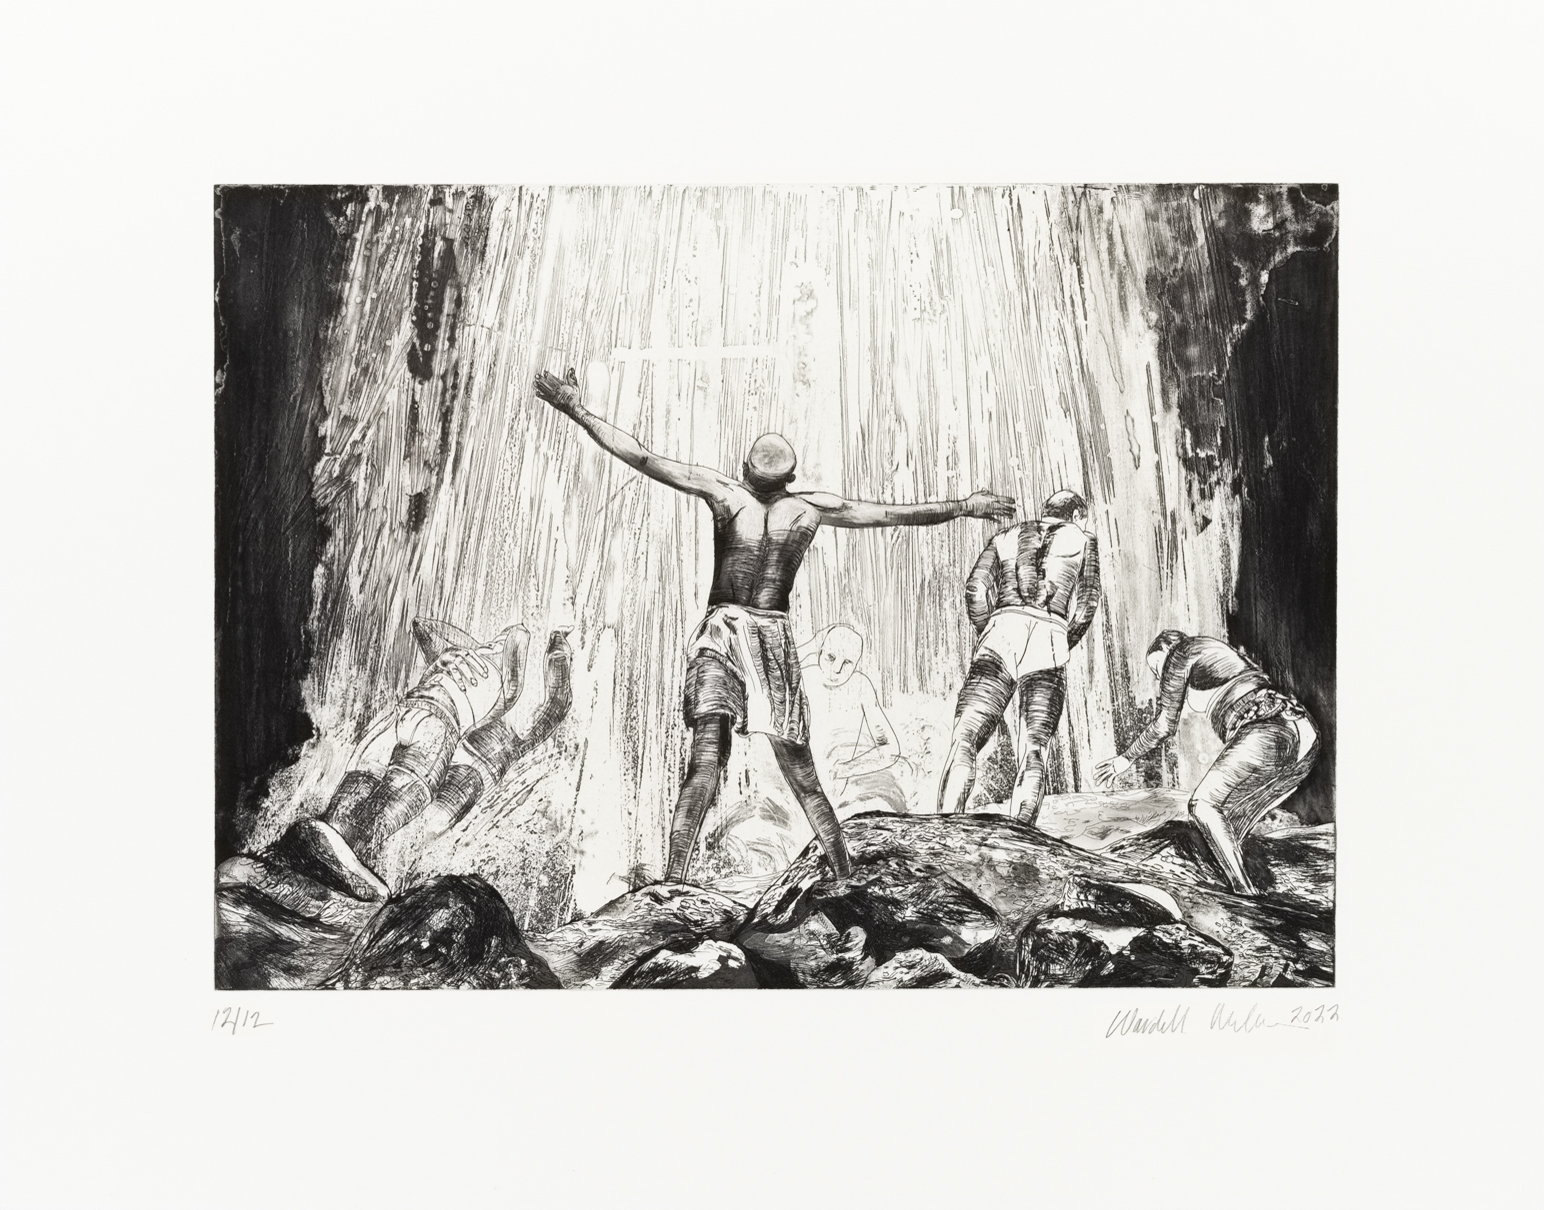 Black and white etching of several figures engaging with a waterfall